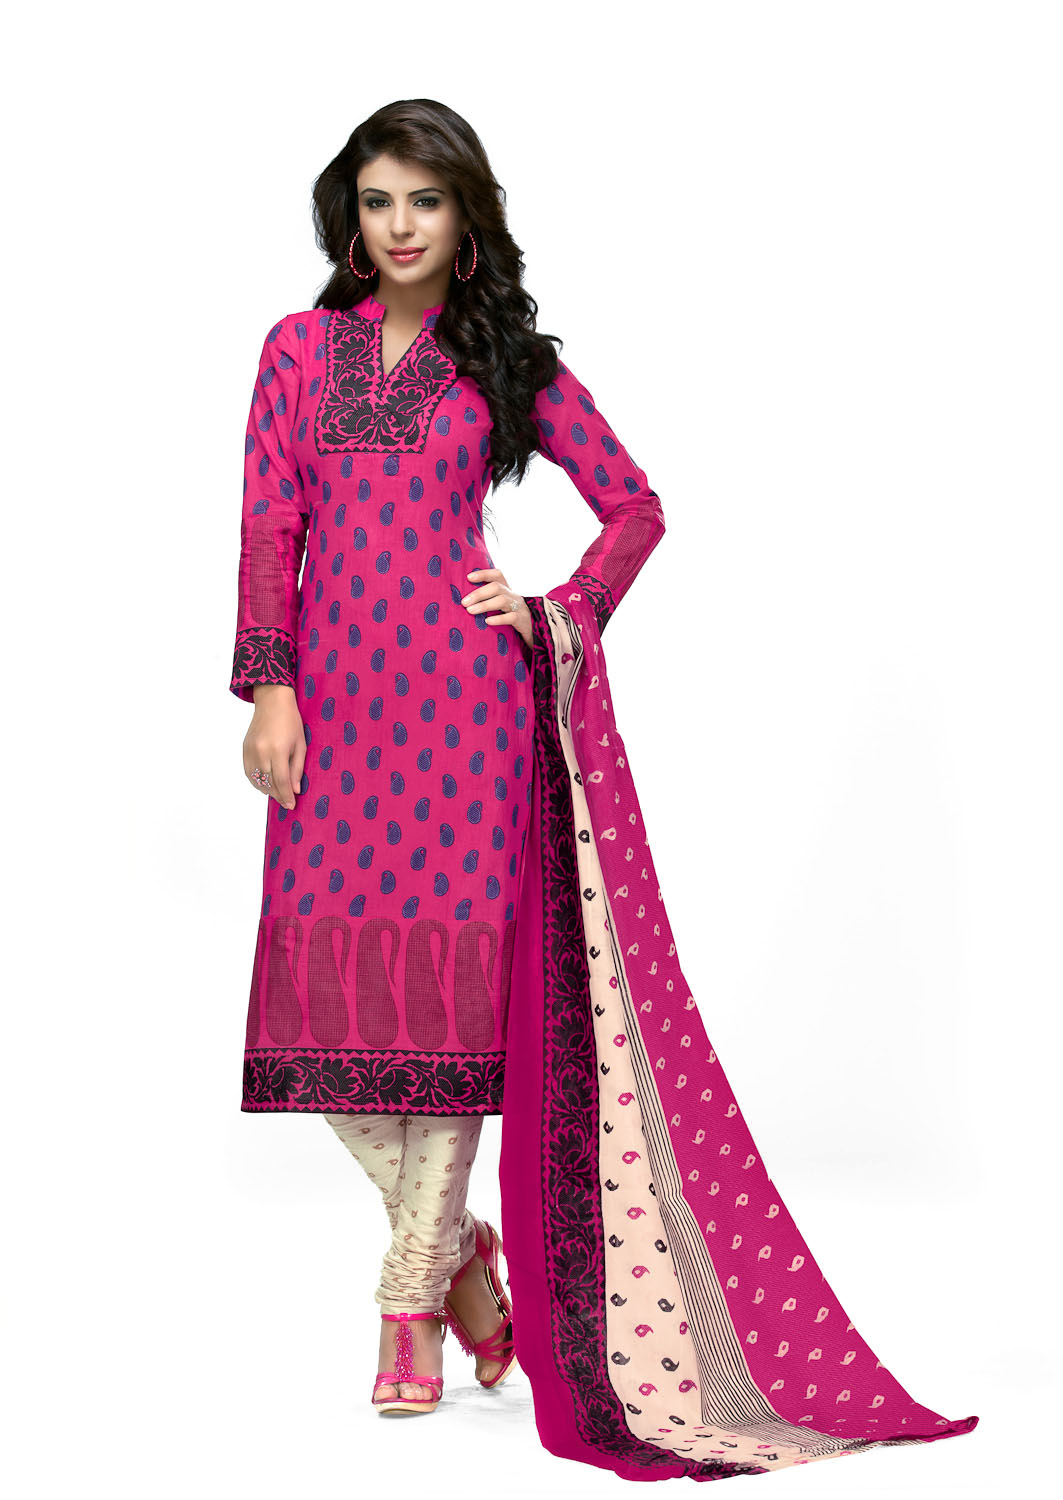 Buy Printed Cotton Dress Materials At Wholesale Price In India.